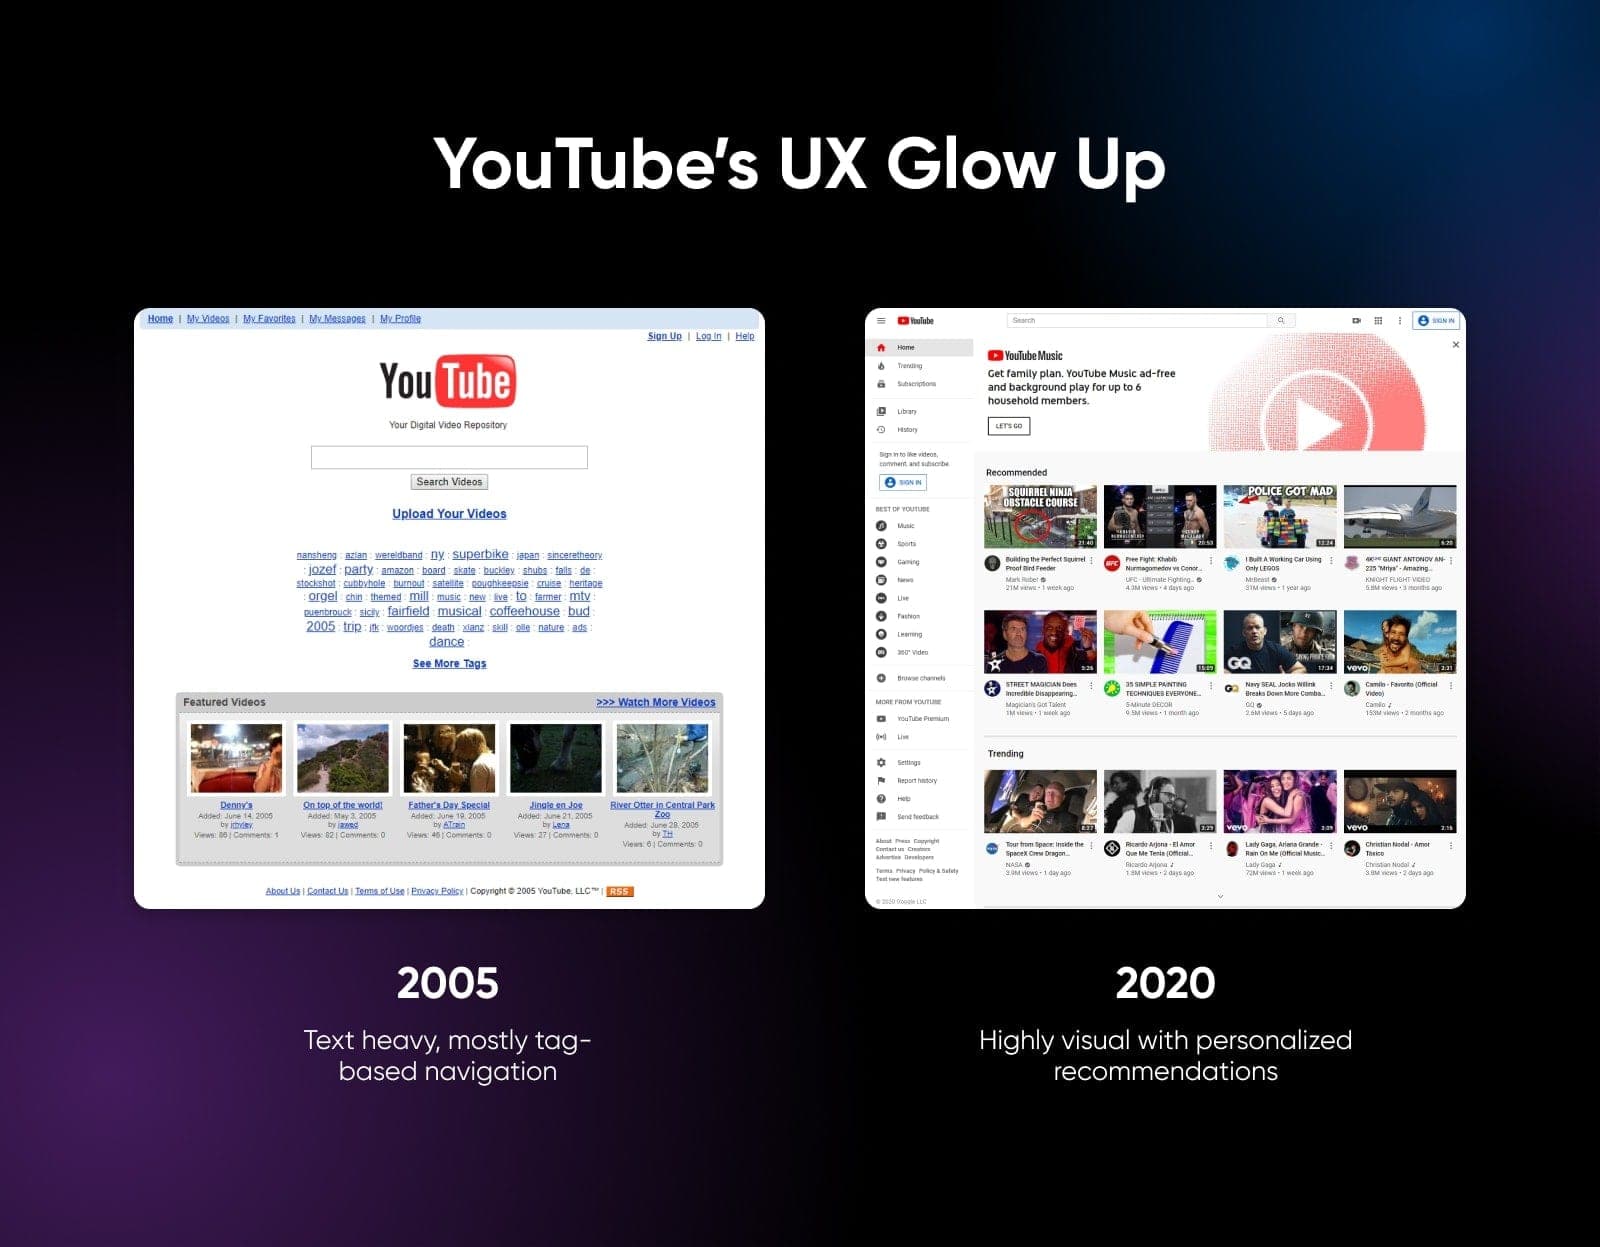 YouTube's 2005 site versus the 2020 site showing how added more visual components with videos and buttons and went away from heavy hyperlinks and tags